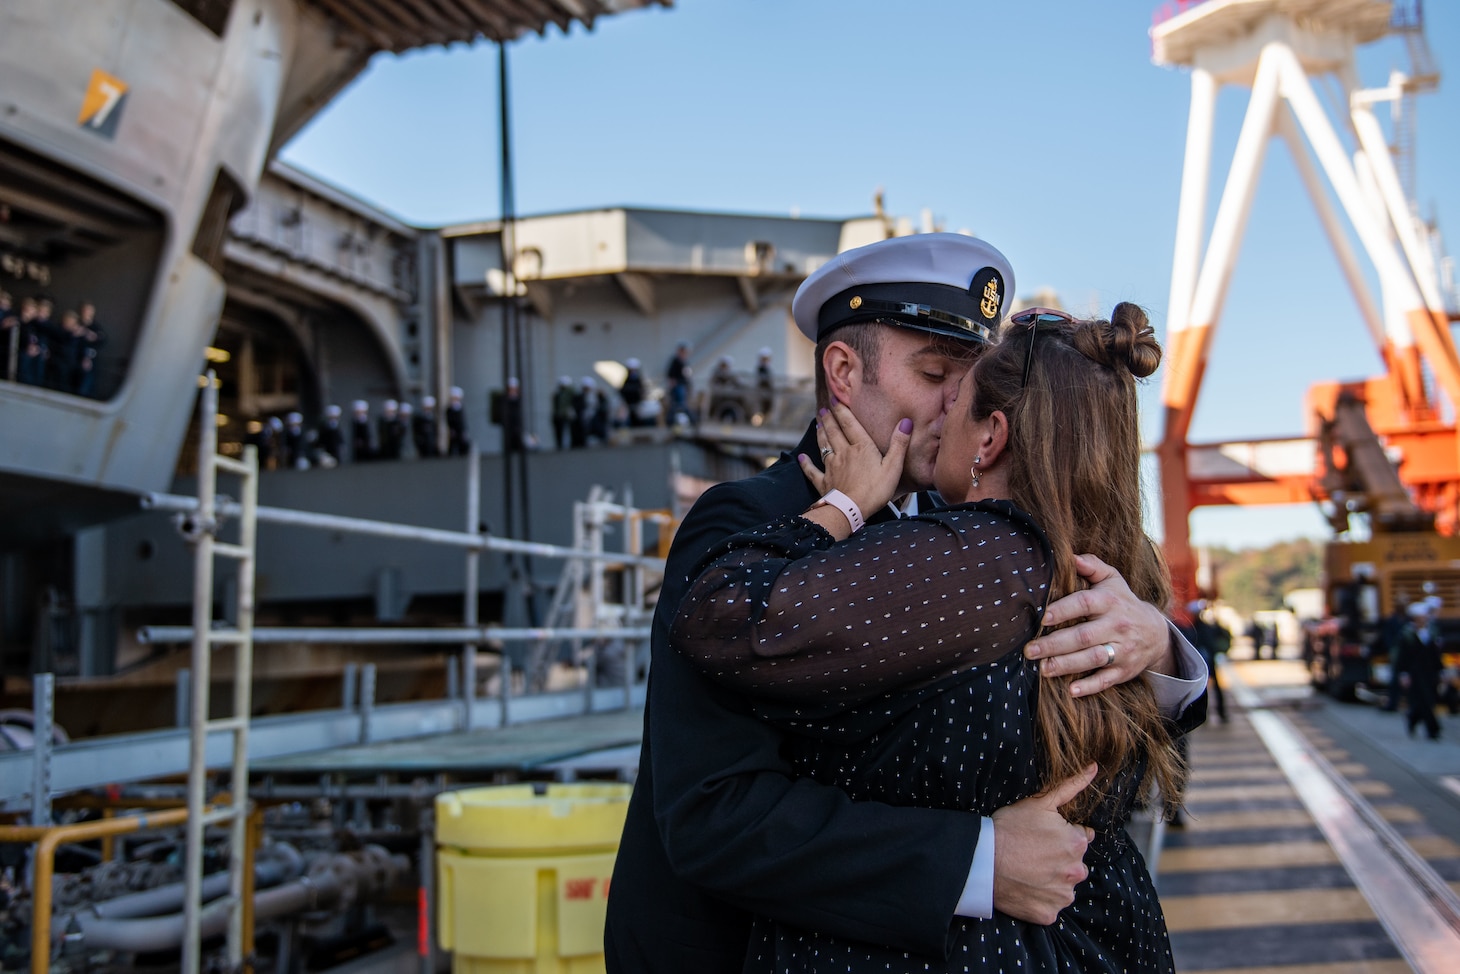 YOKOSUKA, Japan (Nov. 19, 2023) Senior Chief Mass Communication Specialist Matthew White, from Kettering, Ohio, greets his wife on the pier as the U.S. Navy’s only forward-deployed aircraft carrier, USS Ronald Reagan (CVN 76), returns to Commander, Fleet Activities Yokosuka, Japan, following a six-month deployment in the Indo-Pacific region, Nov. 19. During Ronald Reagan’s deployment, the ship conducted multinational exercises with the Japan Maritime Self-Defense Force (JMSDF), Royal Australian Navy, Indonesian Navy, and Republic of Korea Navy, a multi-large deck event with USS Carl Vinson (CVN 70), Carrier Strike Group 1, and JMSDF first-in-class helicopter destroyer JS Hyuga (DDH 181), and visited Vietnam, Republic of Korea, and the Philippines. Ronald Reagan, the flagship of Carrier Strike Group 5, provides a combat-ready force that protects and defends the United States, and supports alliances, partnerships and collective maritime interests in the Indo-Pacific region. (U.S. Navy photo by Mass Communication Specialist 2nd Class Caroline H. Lui)